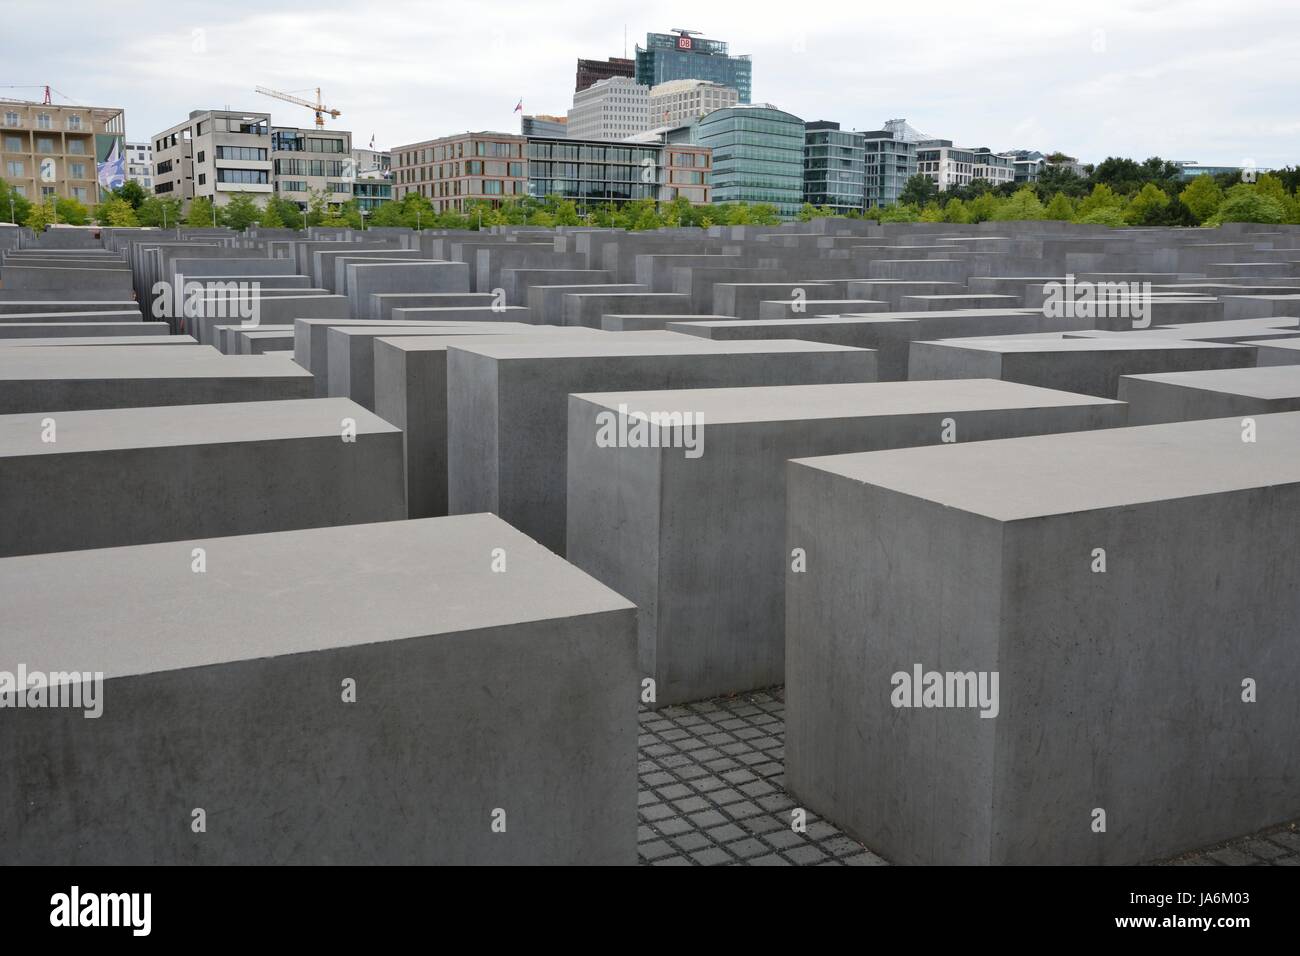 BERLIN, GERMANY - AUGUST 18:The Memorial of the murdered Jews of Europe in Berlin, Germany on August 18, 2013. The site contains 2,711 concrete blocks and was designed by Peter Eisenman and Buro Happold. Foto taken from Gertrud-Kolmar street with view to the memorial. Stock Photo